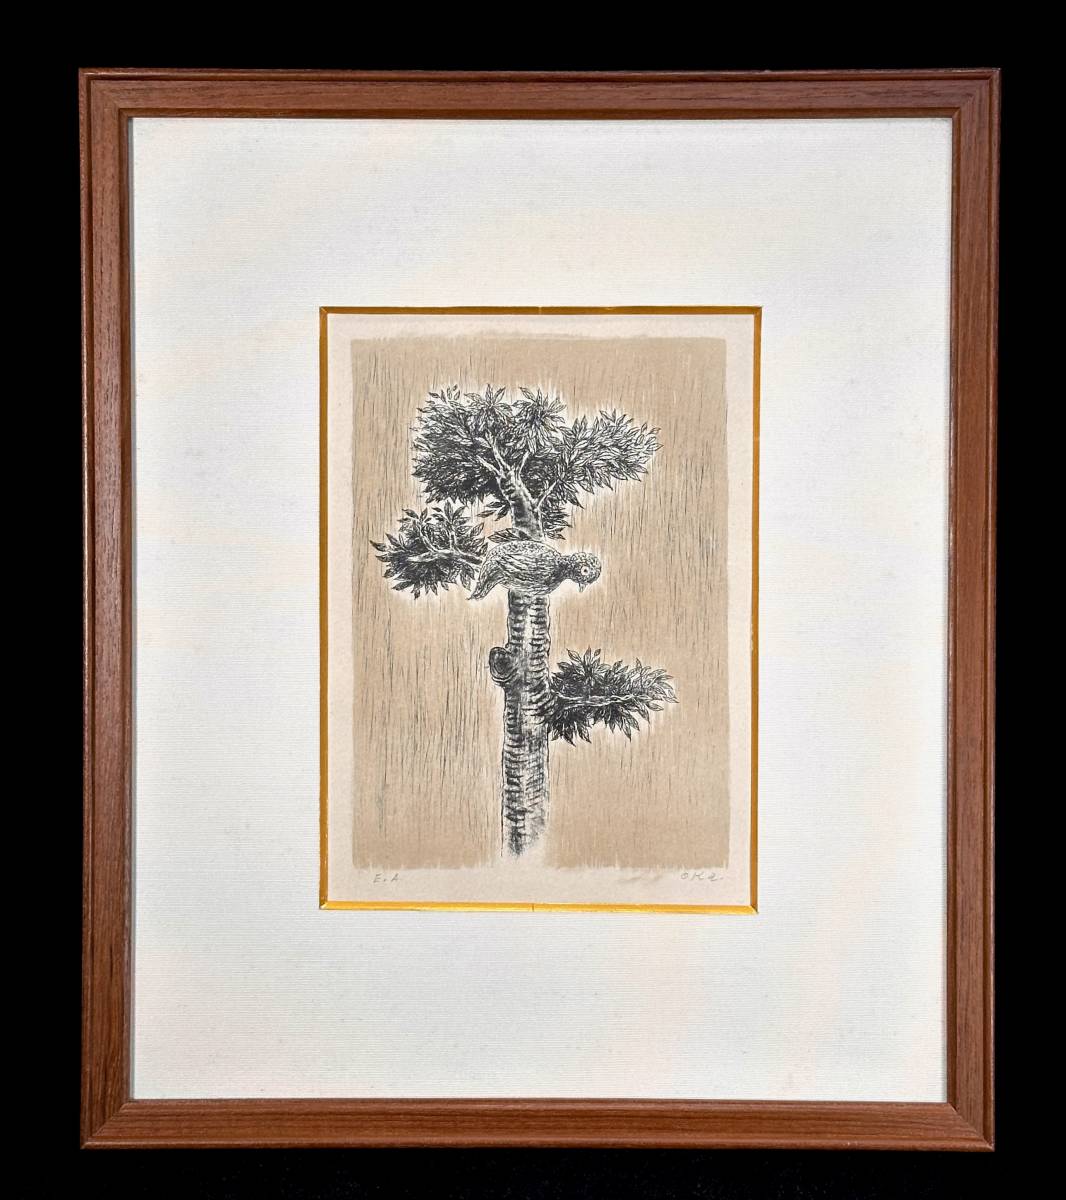 [Genuine] Oka Shikanosuke Birds on a Tree Lithograph for artist preservation EA Painting Signed by the artist Art Framed Width 36cm Height 42.5cm, Artwork, Prints, Lithography, Lithograph